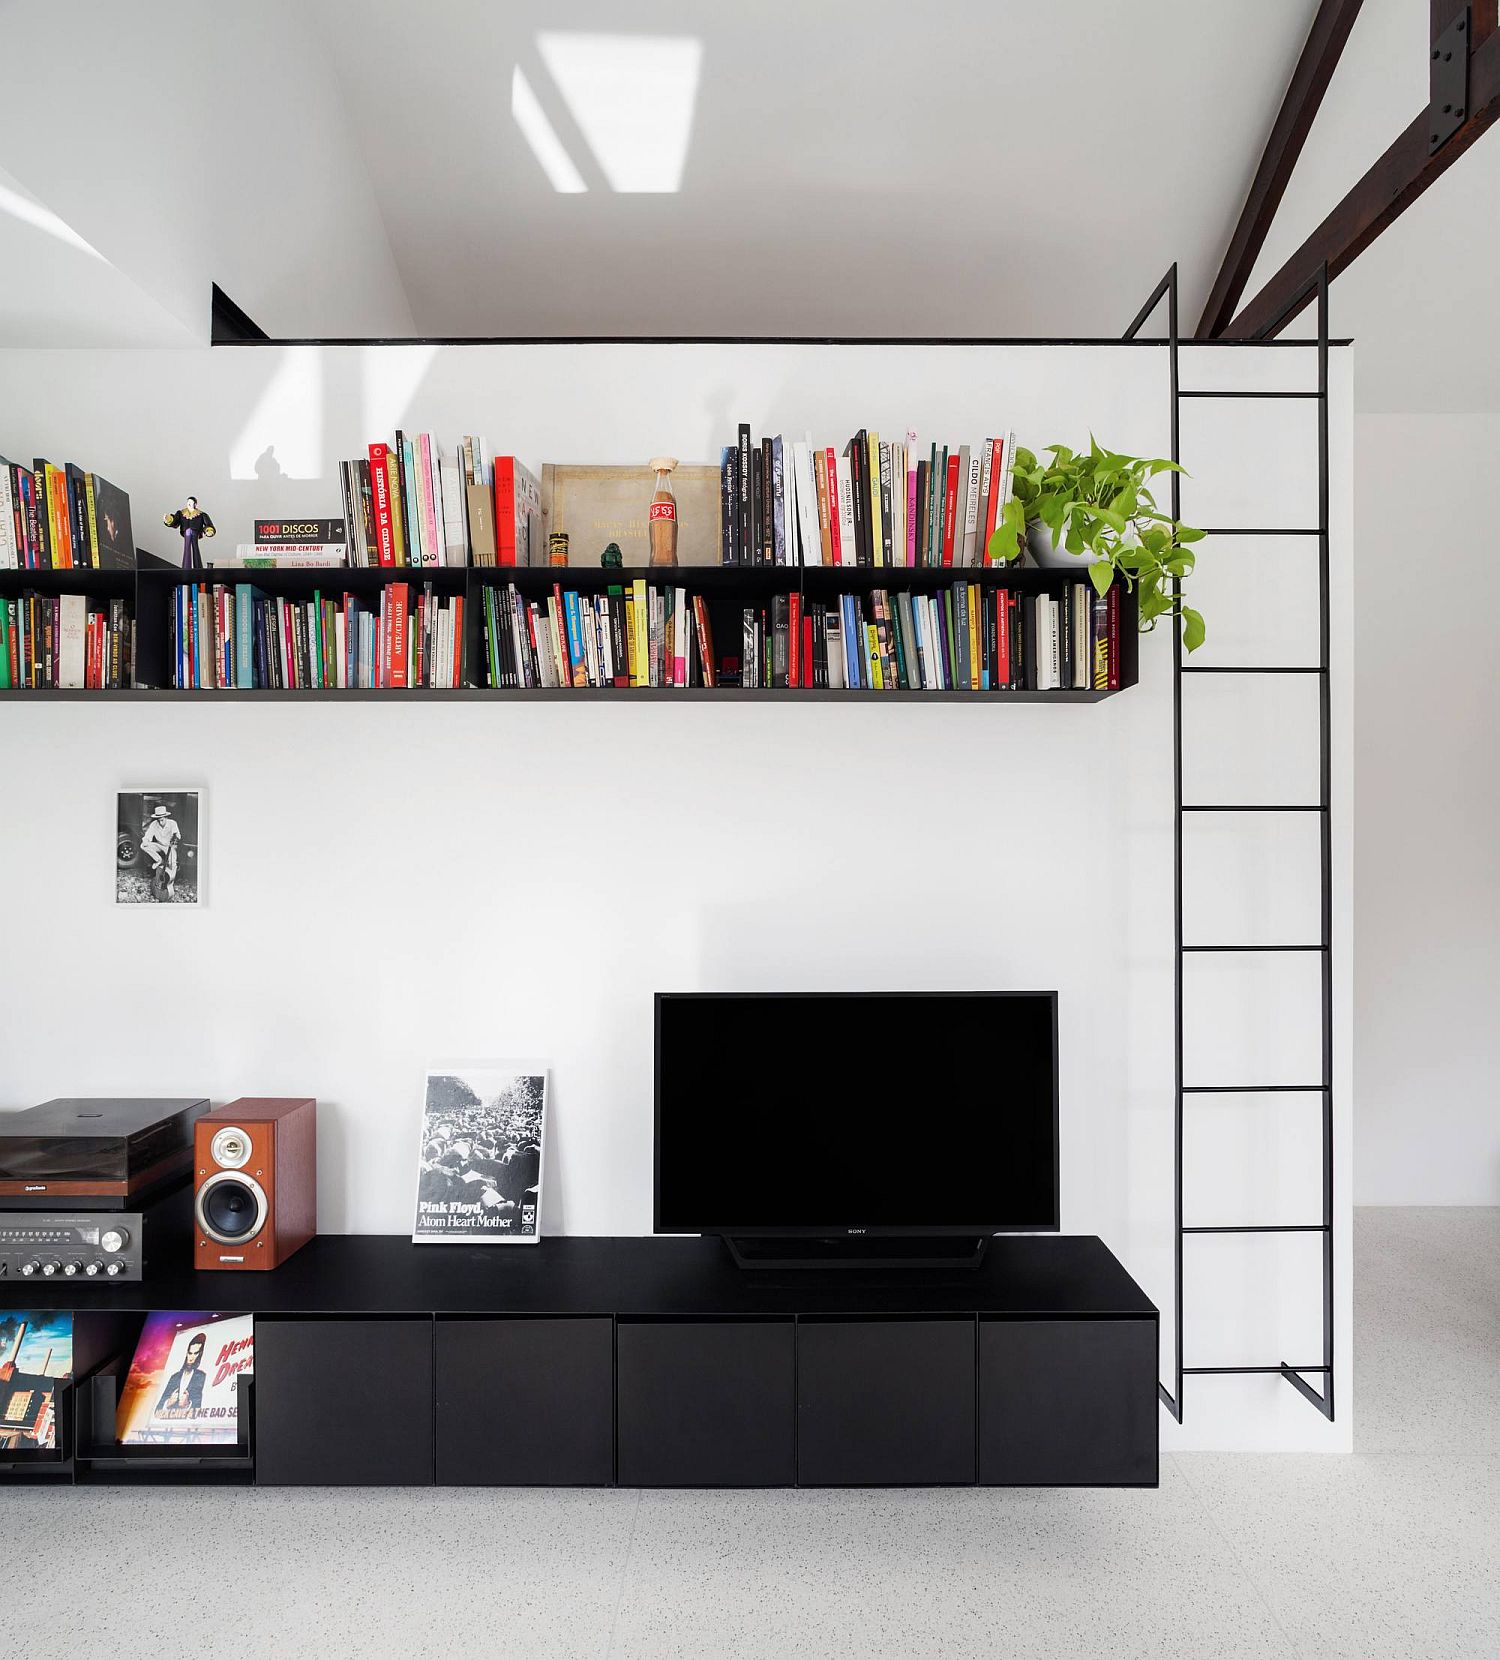 White-wall-of-the-living-roomw-ith-metallic-shelving-in-black